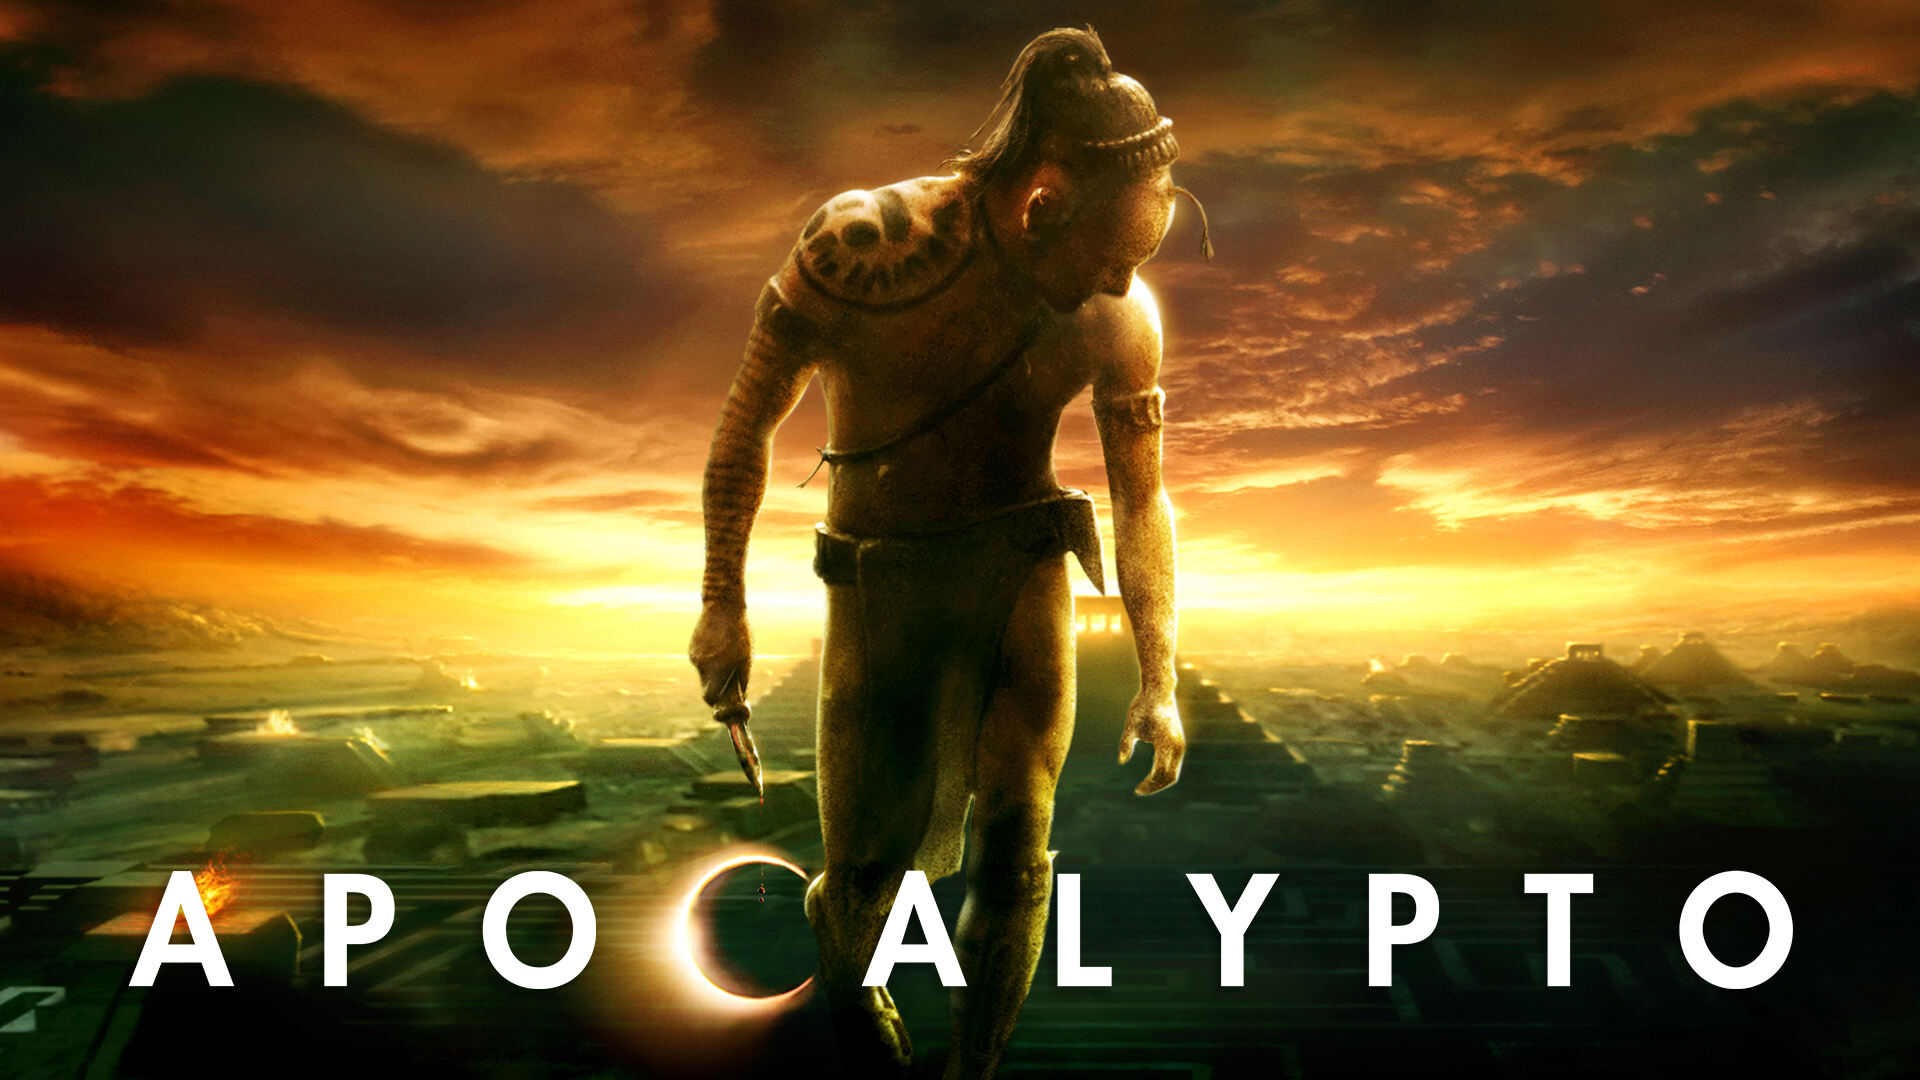 34-facts-about-the-movie-apocalypto-1696731014.jpg